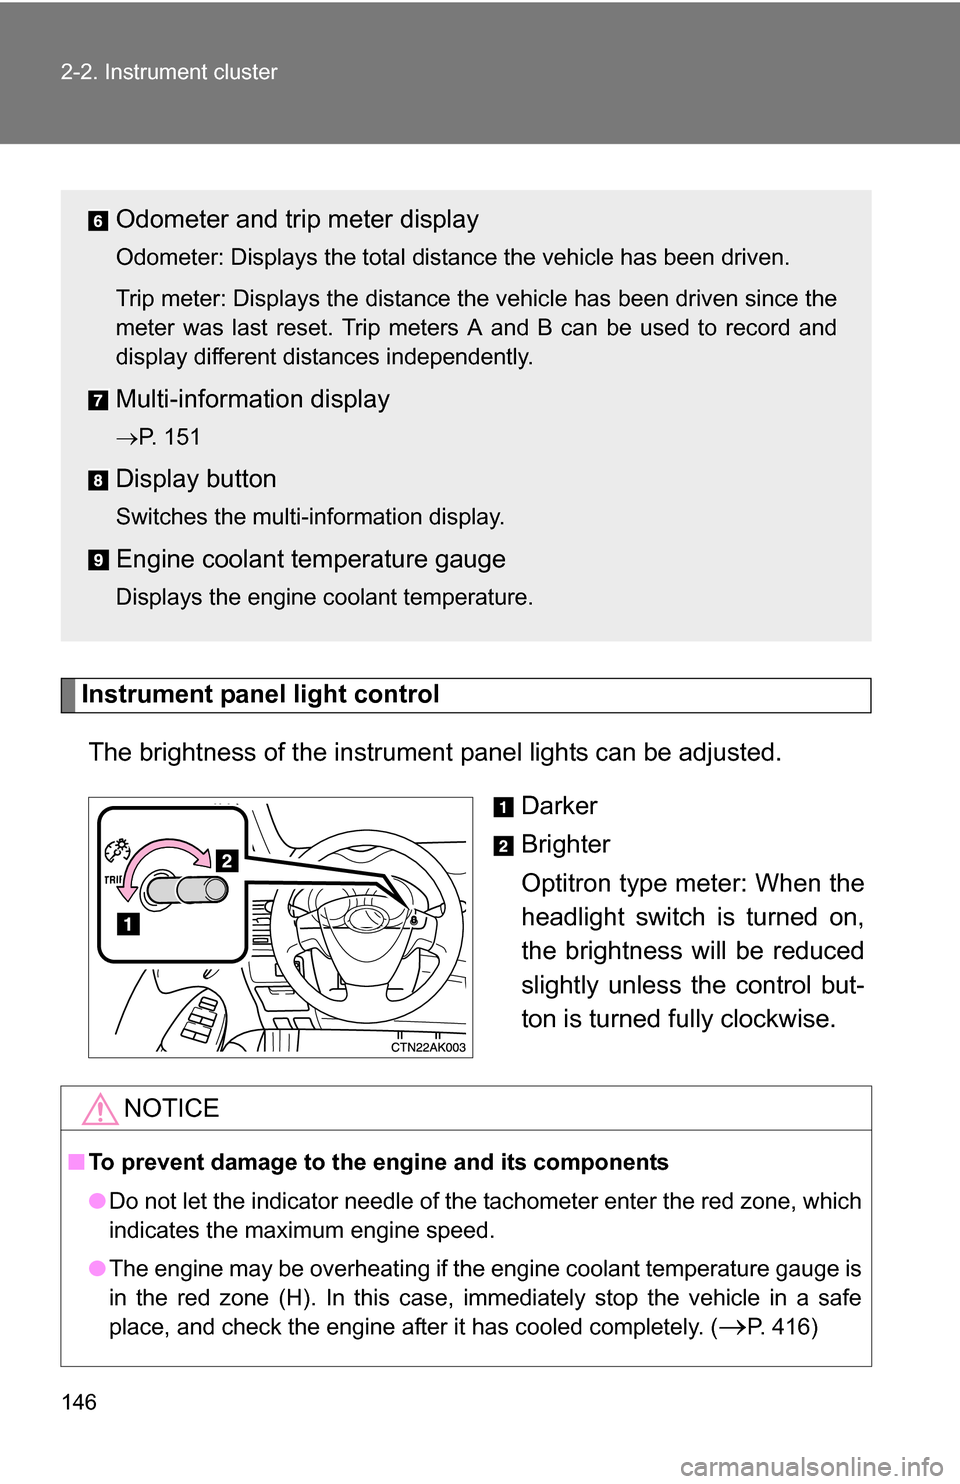 TOYOTA COROLLA 2010 10.G Owners Manual 146 2-2. Instrument cluster
Instrument panel light controlThe brightness of the instrument  panel lights can be adjusted. 
Darker
Brighter
Optitron type meter: When the
headlight switch is turned on,
